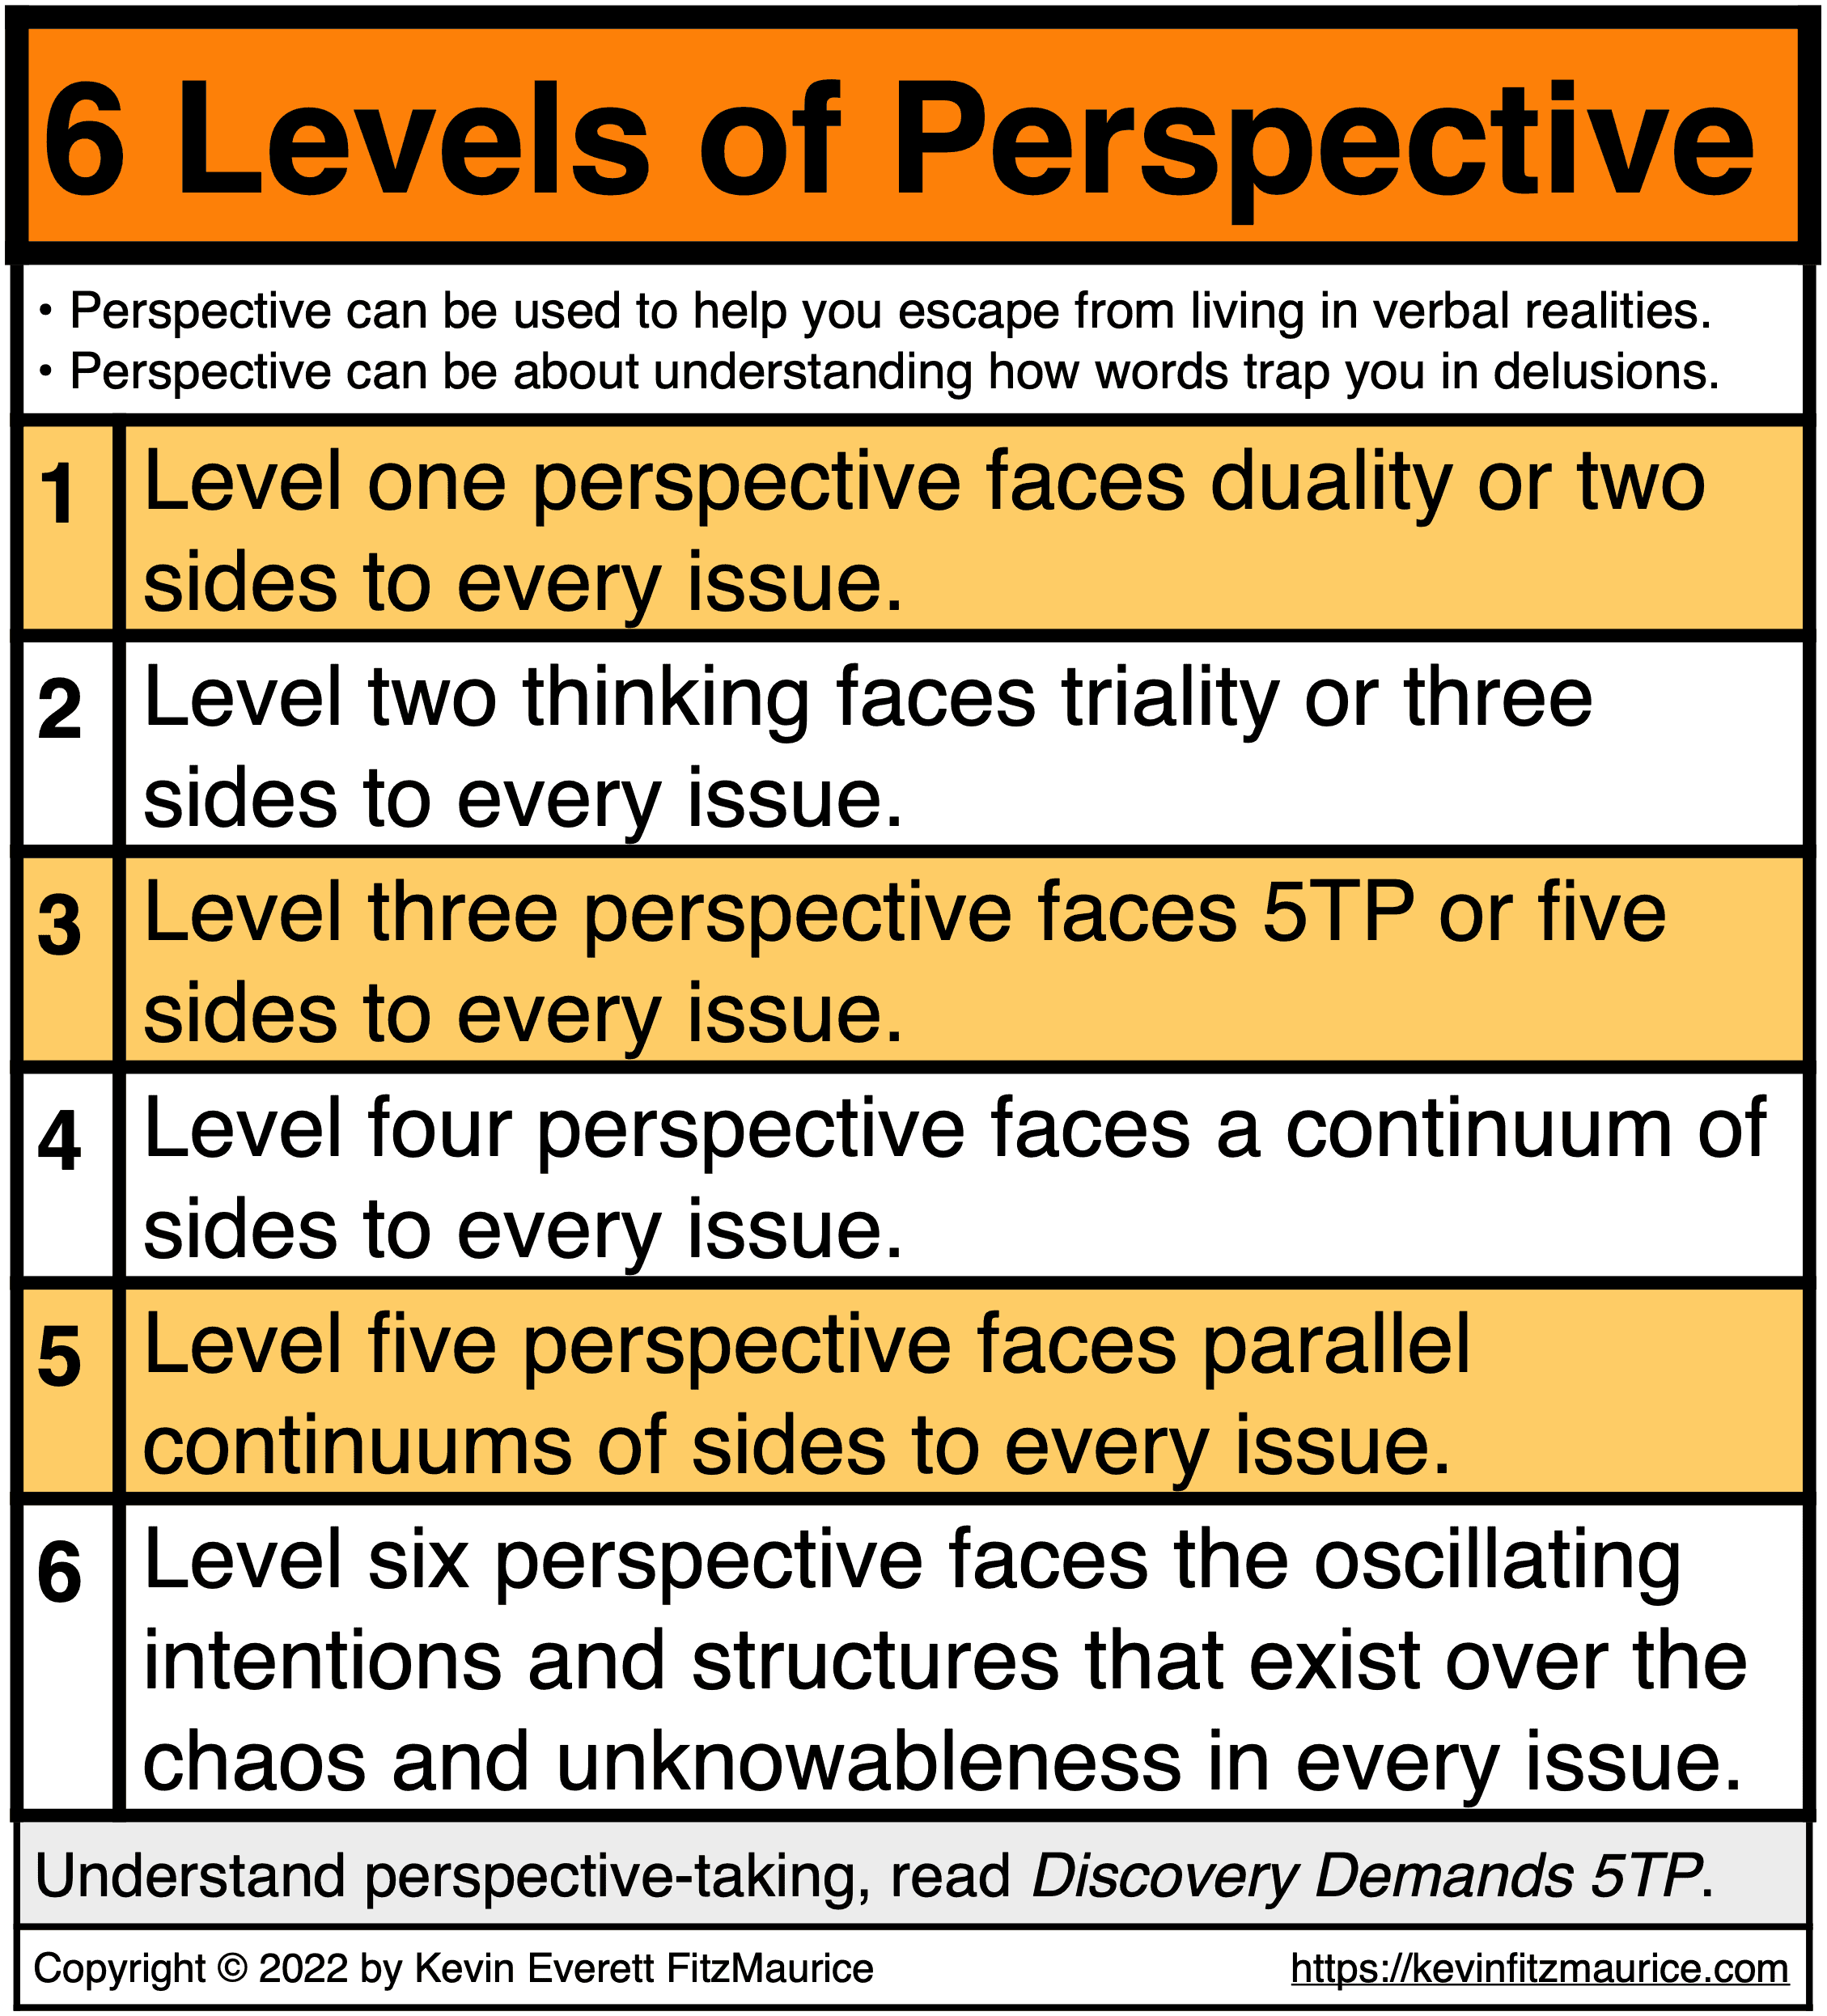 6 Levels of Perspective-Taking